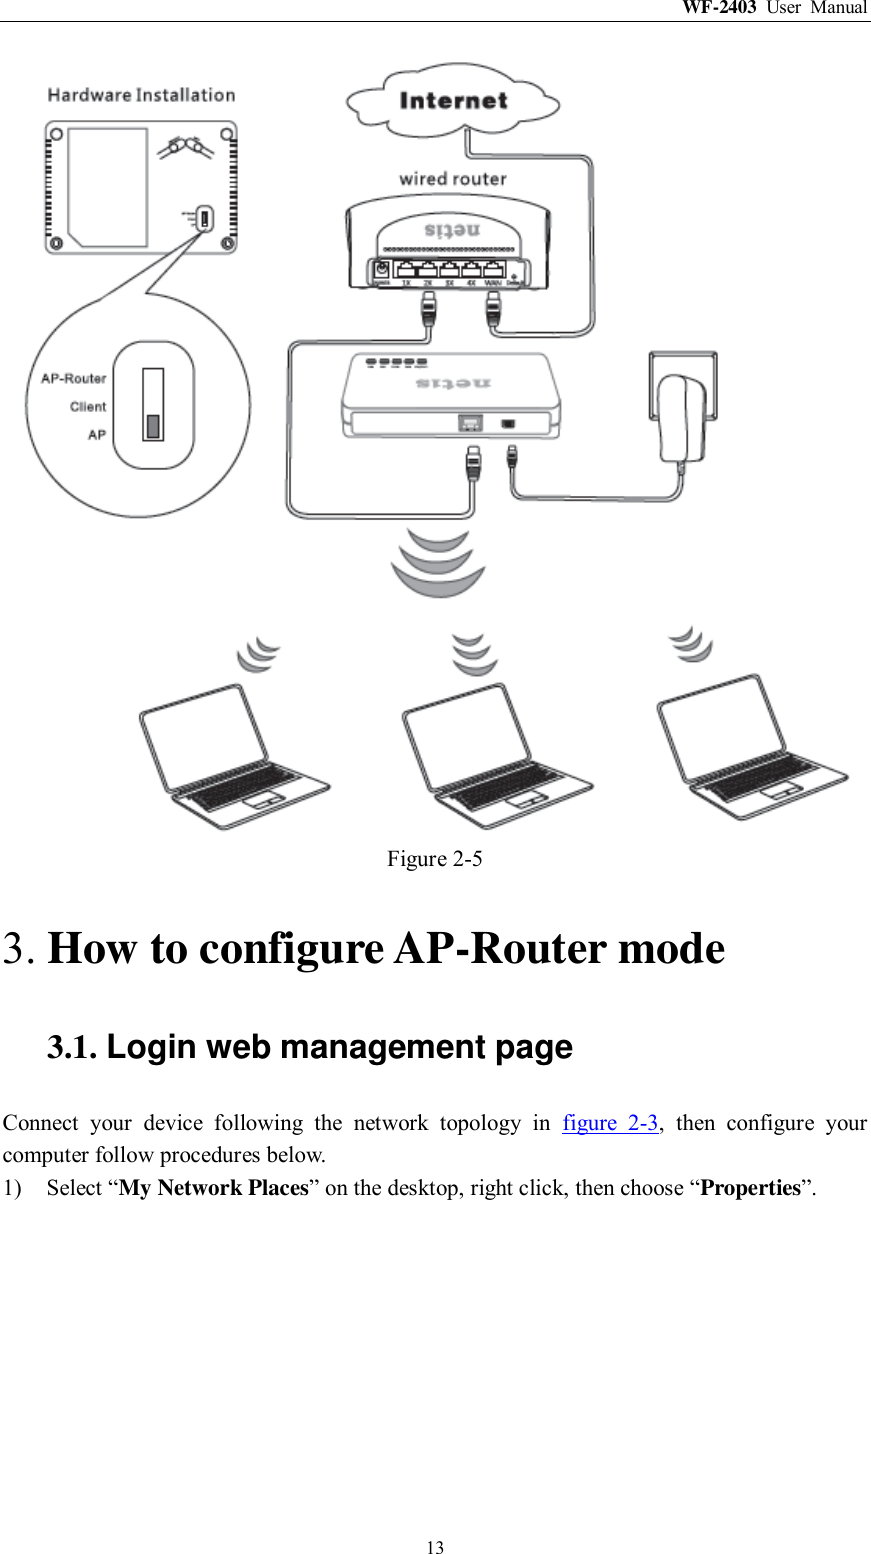 WF-2403  User  Manual  13  Figure 2-5 3. How to configure AP-Router mode 3.1. Login web management page Connect  your  device  following  the  network  topology  in  figure  2-3,  then  configure  your computer follow procedures below. 1) Select “My Network Places” on the desktop, right click, then choose “Properties”. 